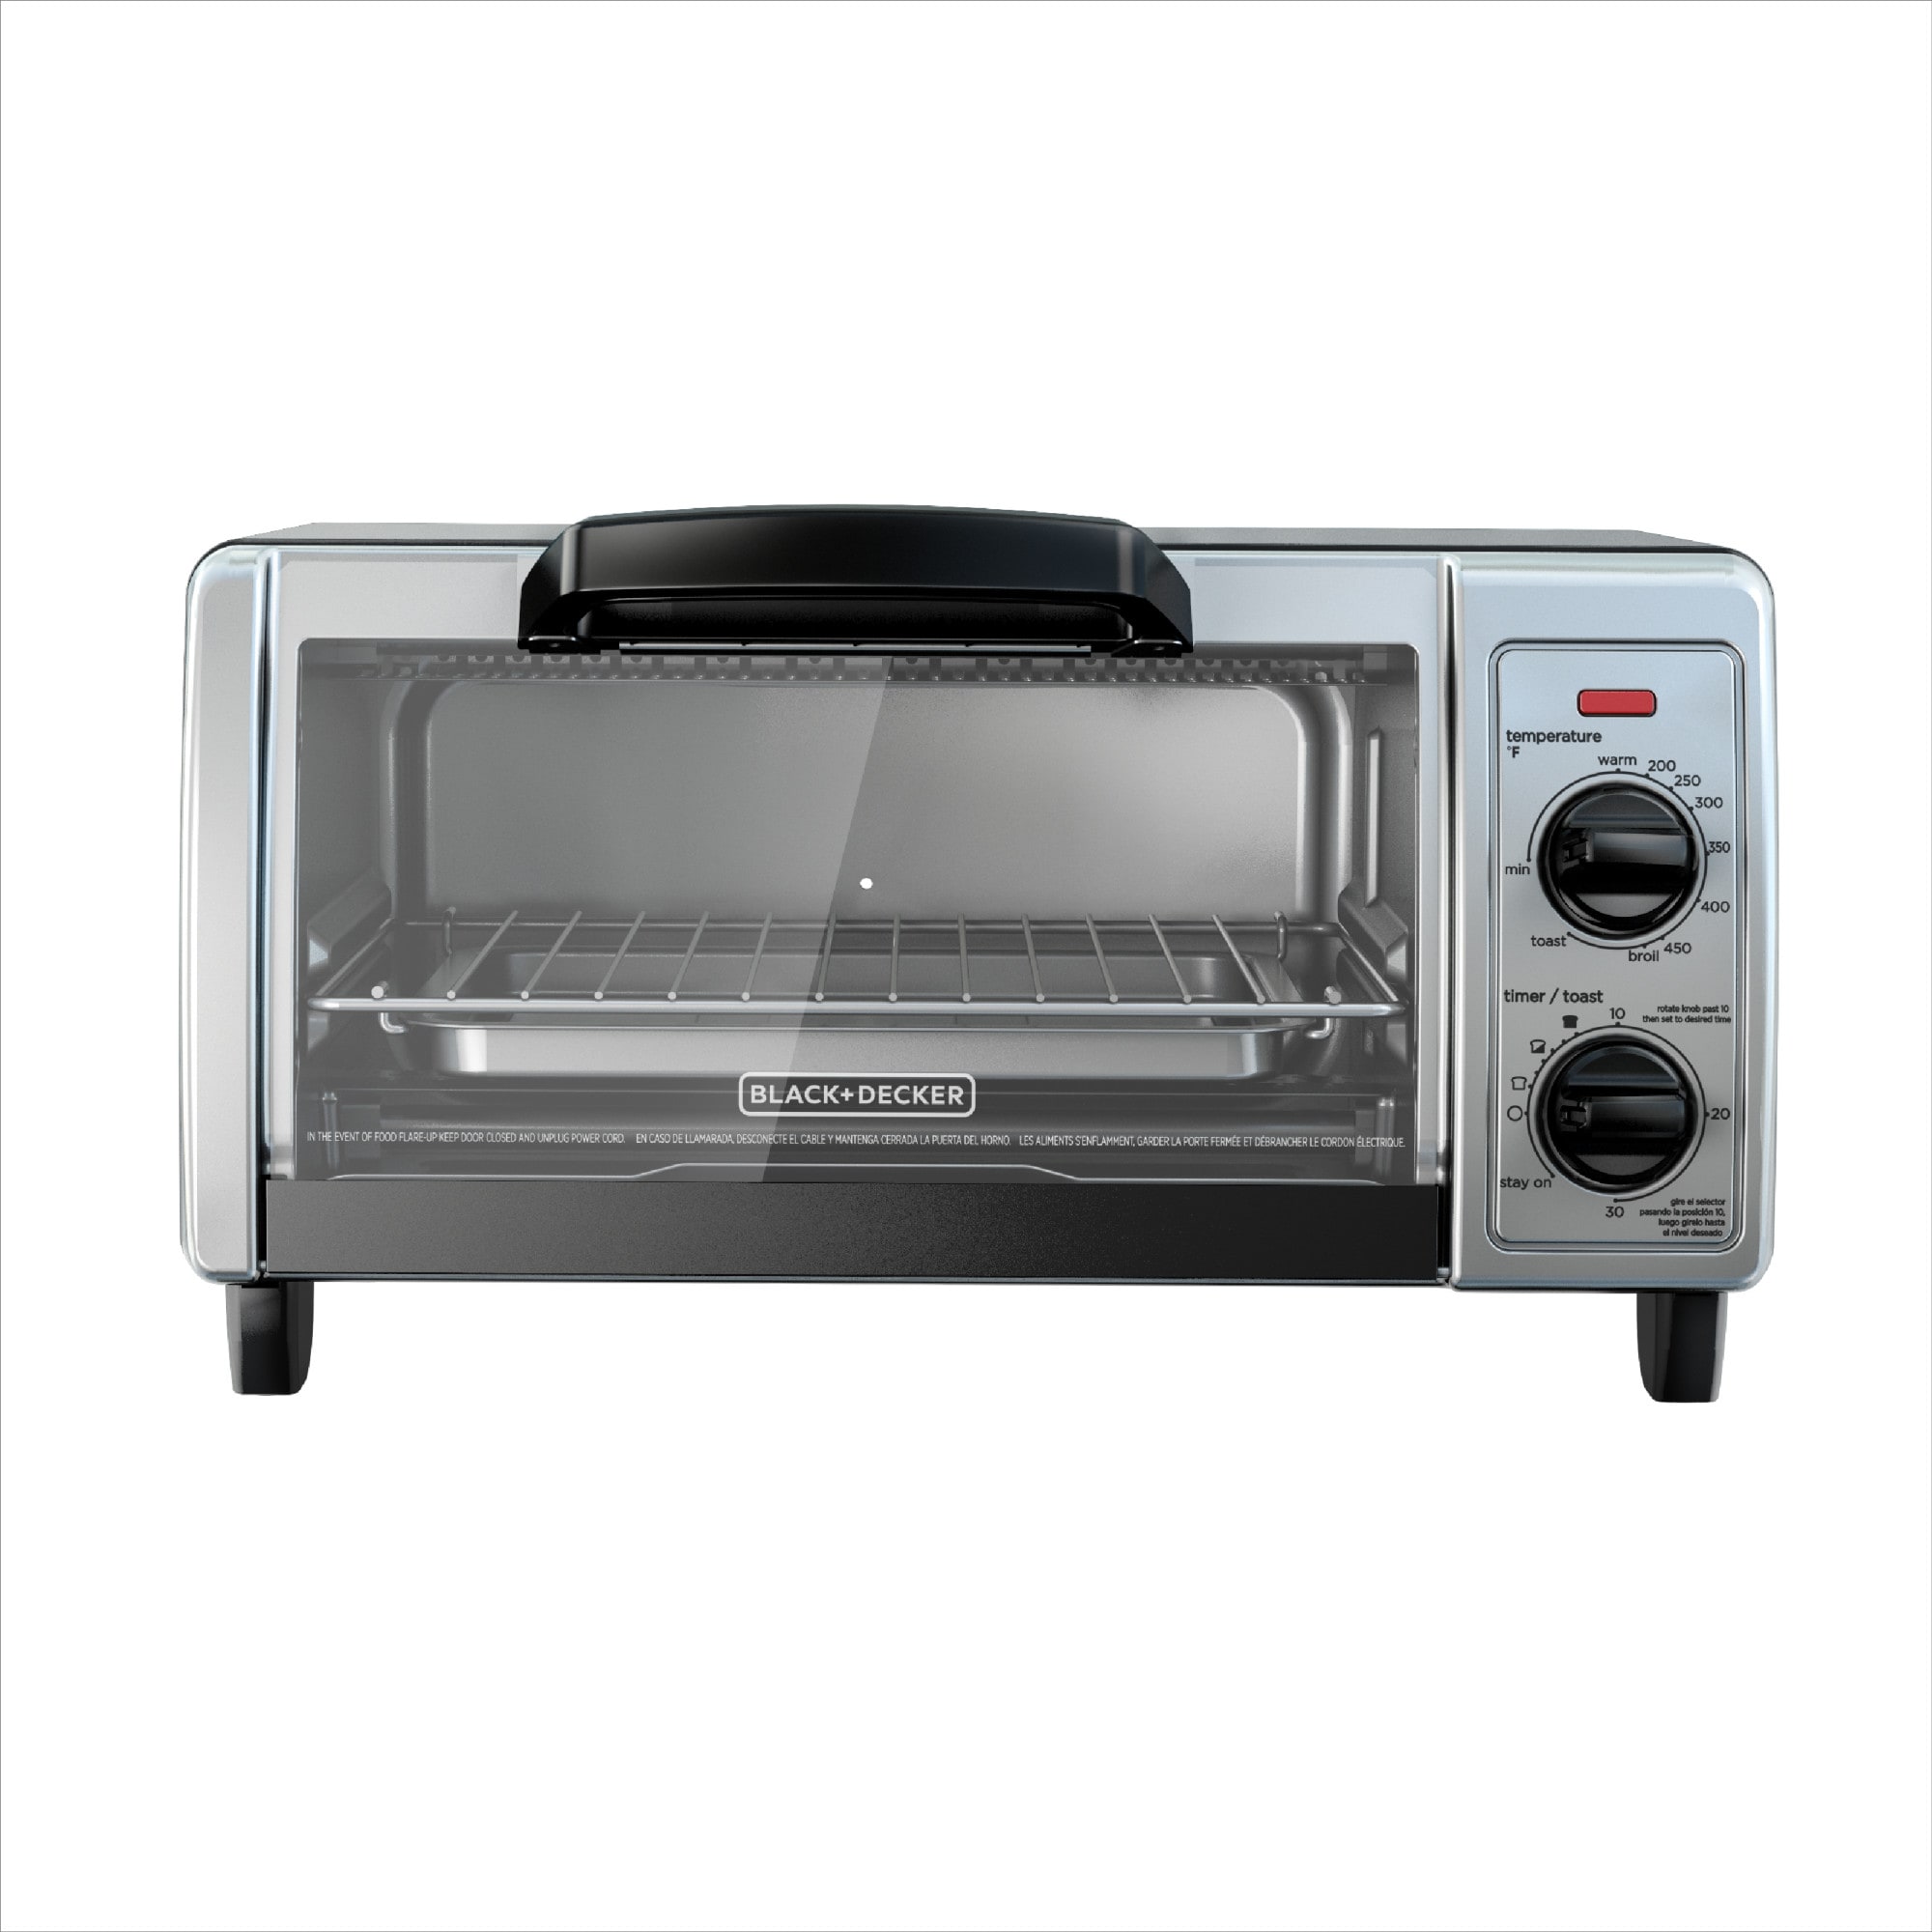 BLACK+DECKER 4-Slice Stainless Steel Convection Toaster Oven (1150